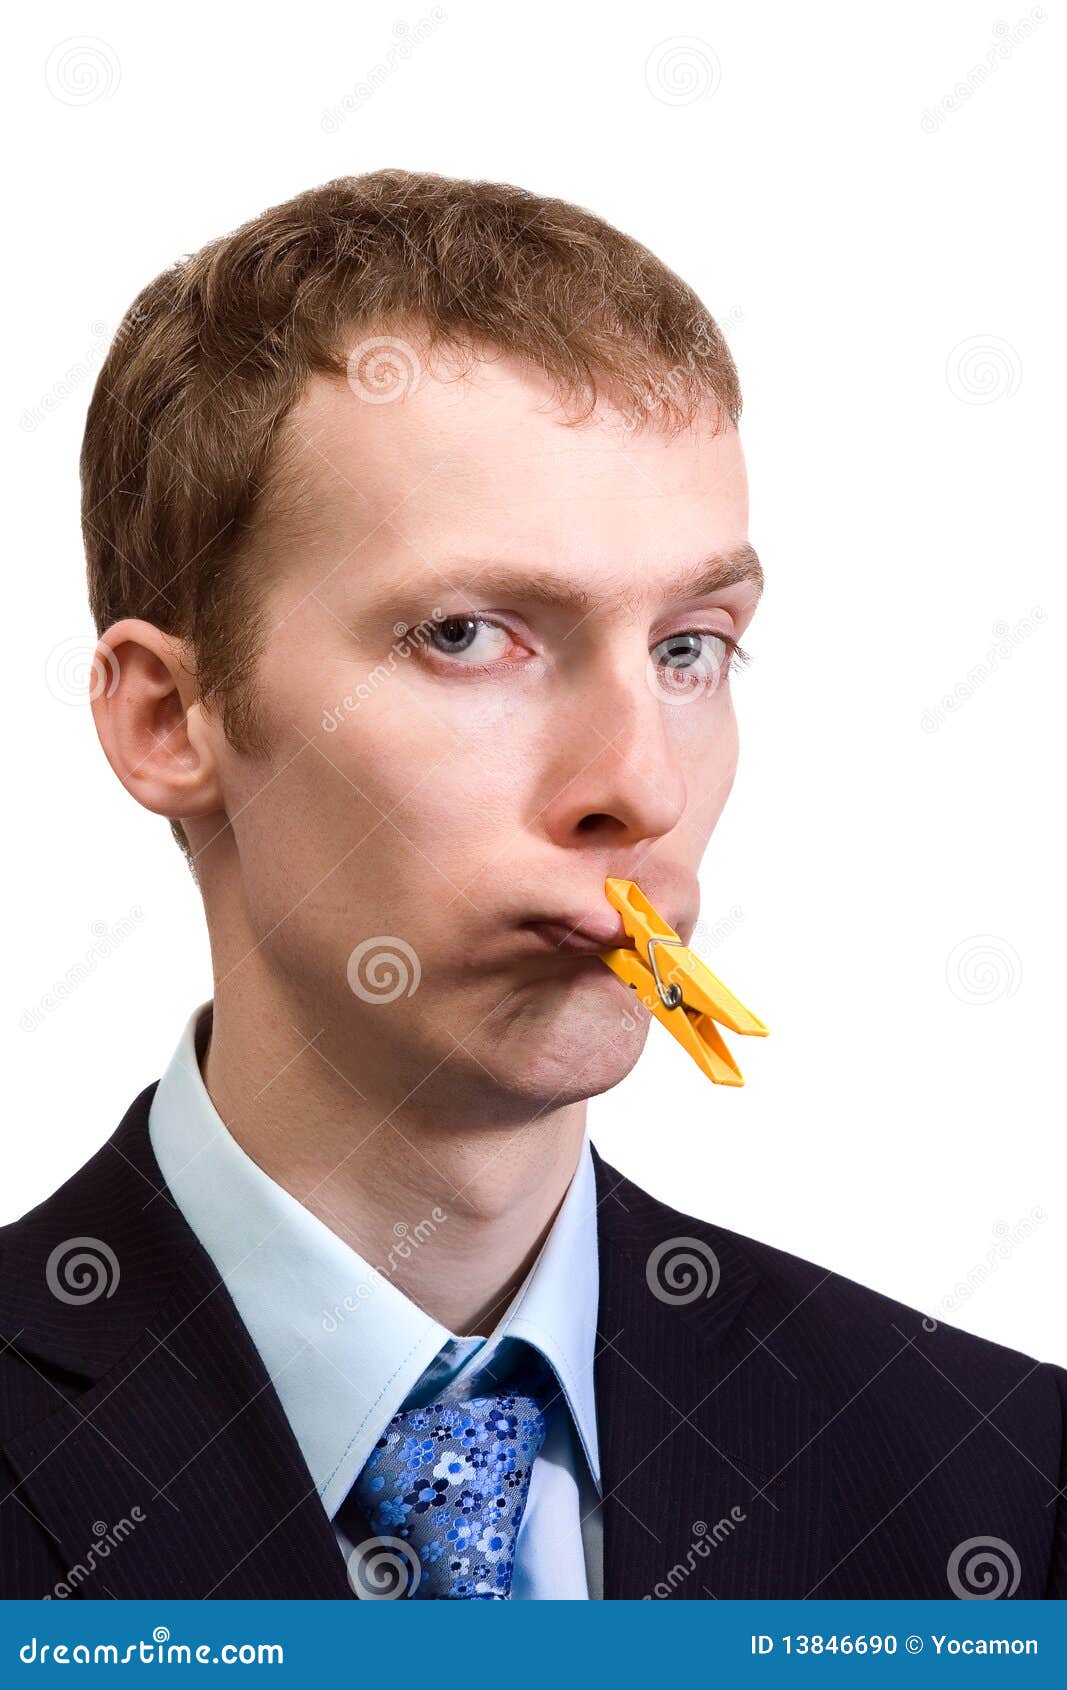 businessman-clothespin-his-mouth-1384669